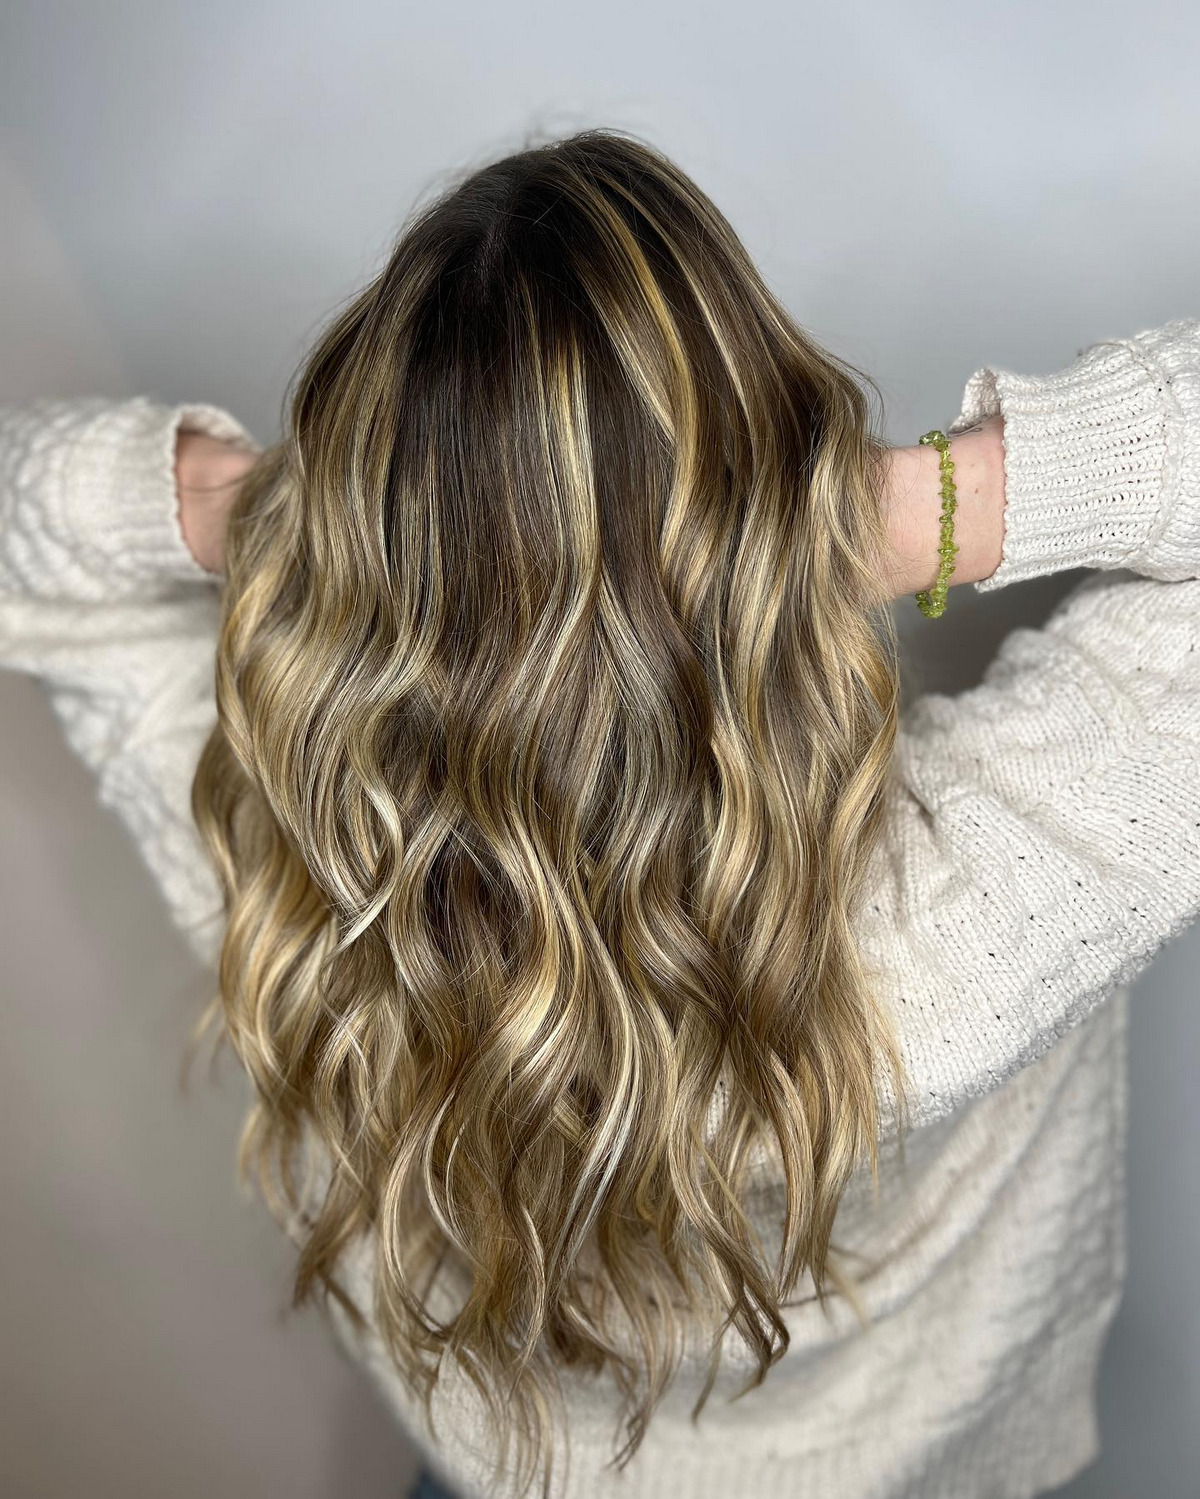 Blonde Balayage With Some Long Layers